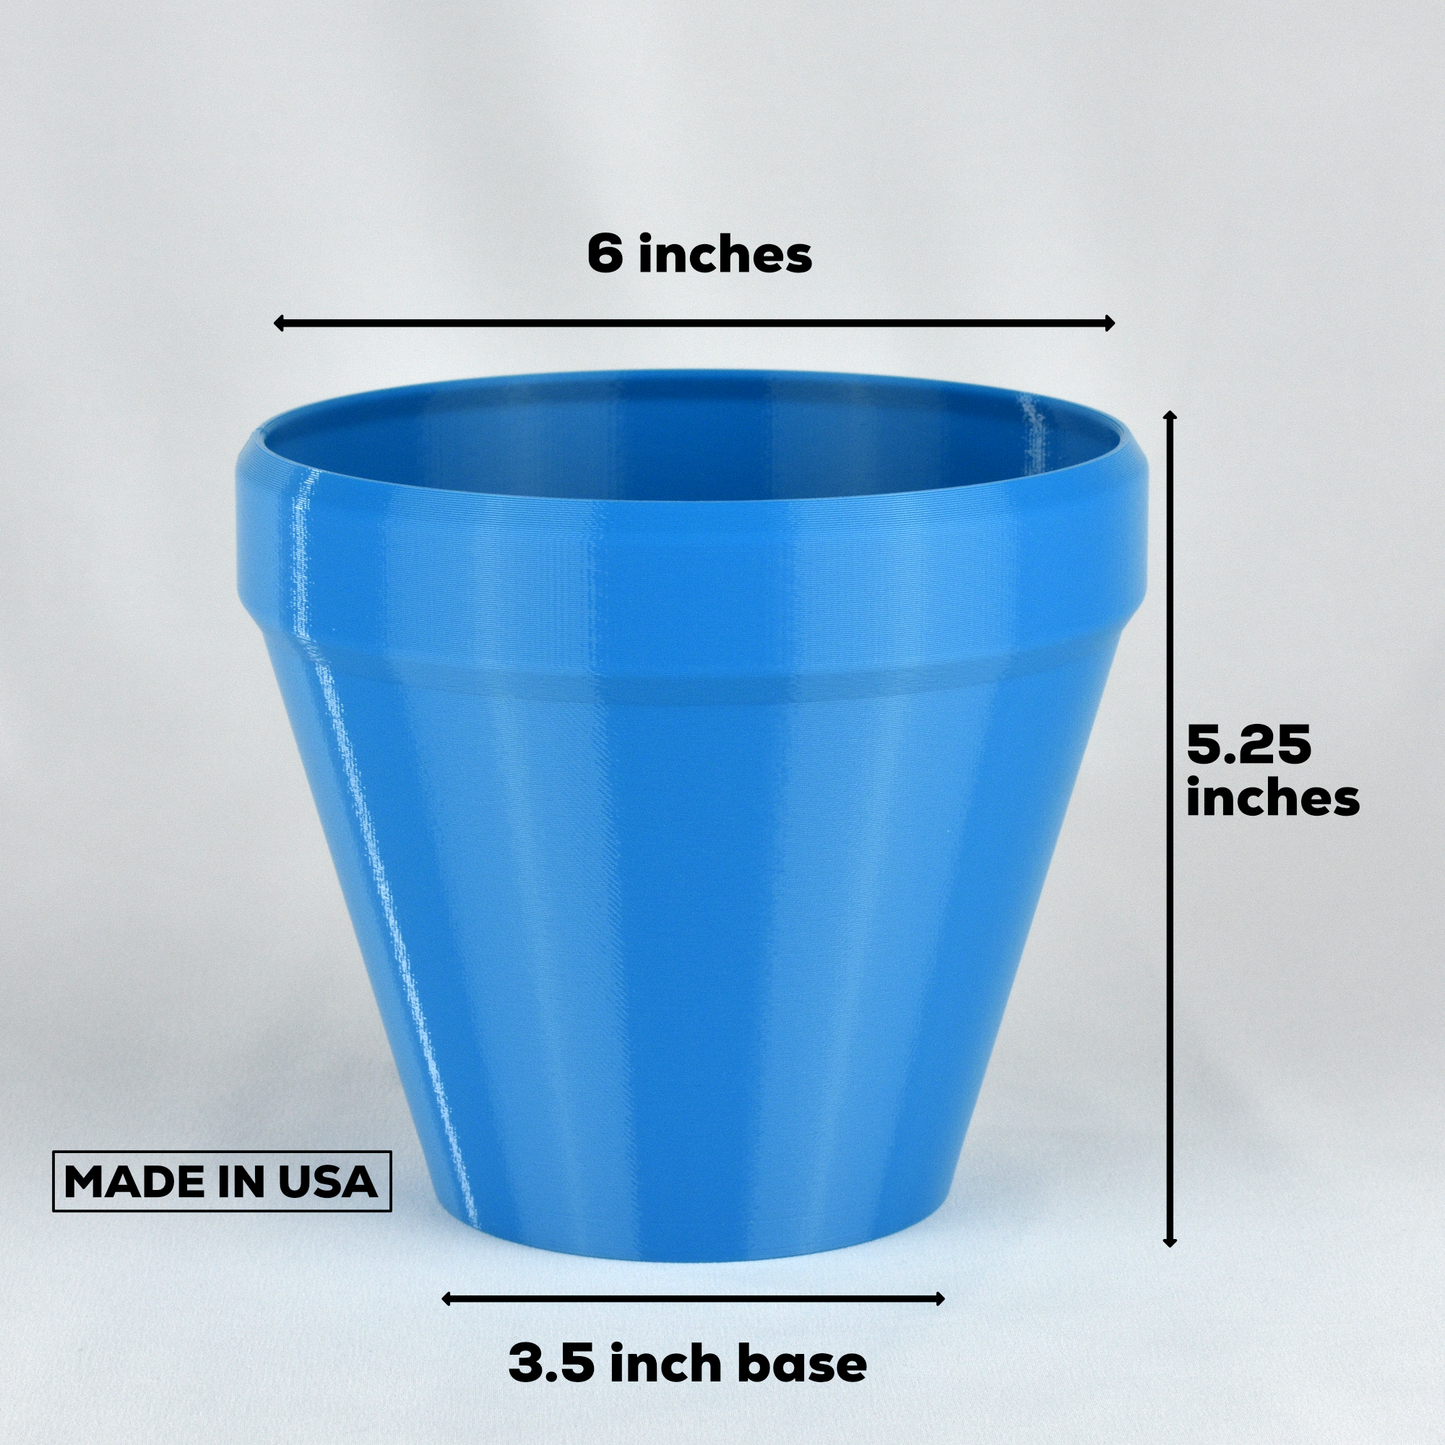 Medium Classic Flower Pot, 6-inch Round Planter, Bright Blue and Other Colors, Indoor/Outdoor